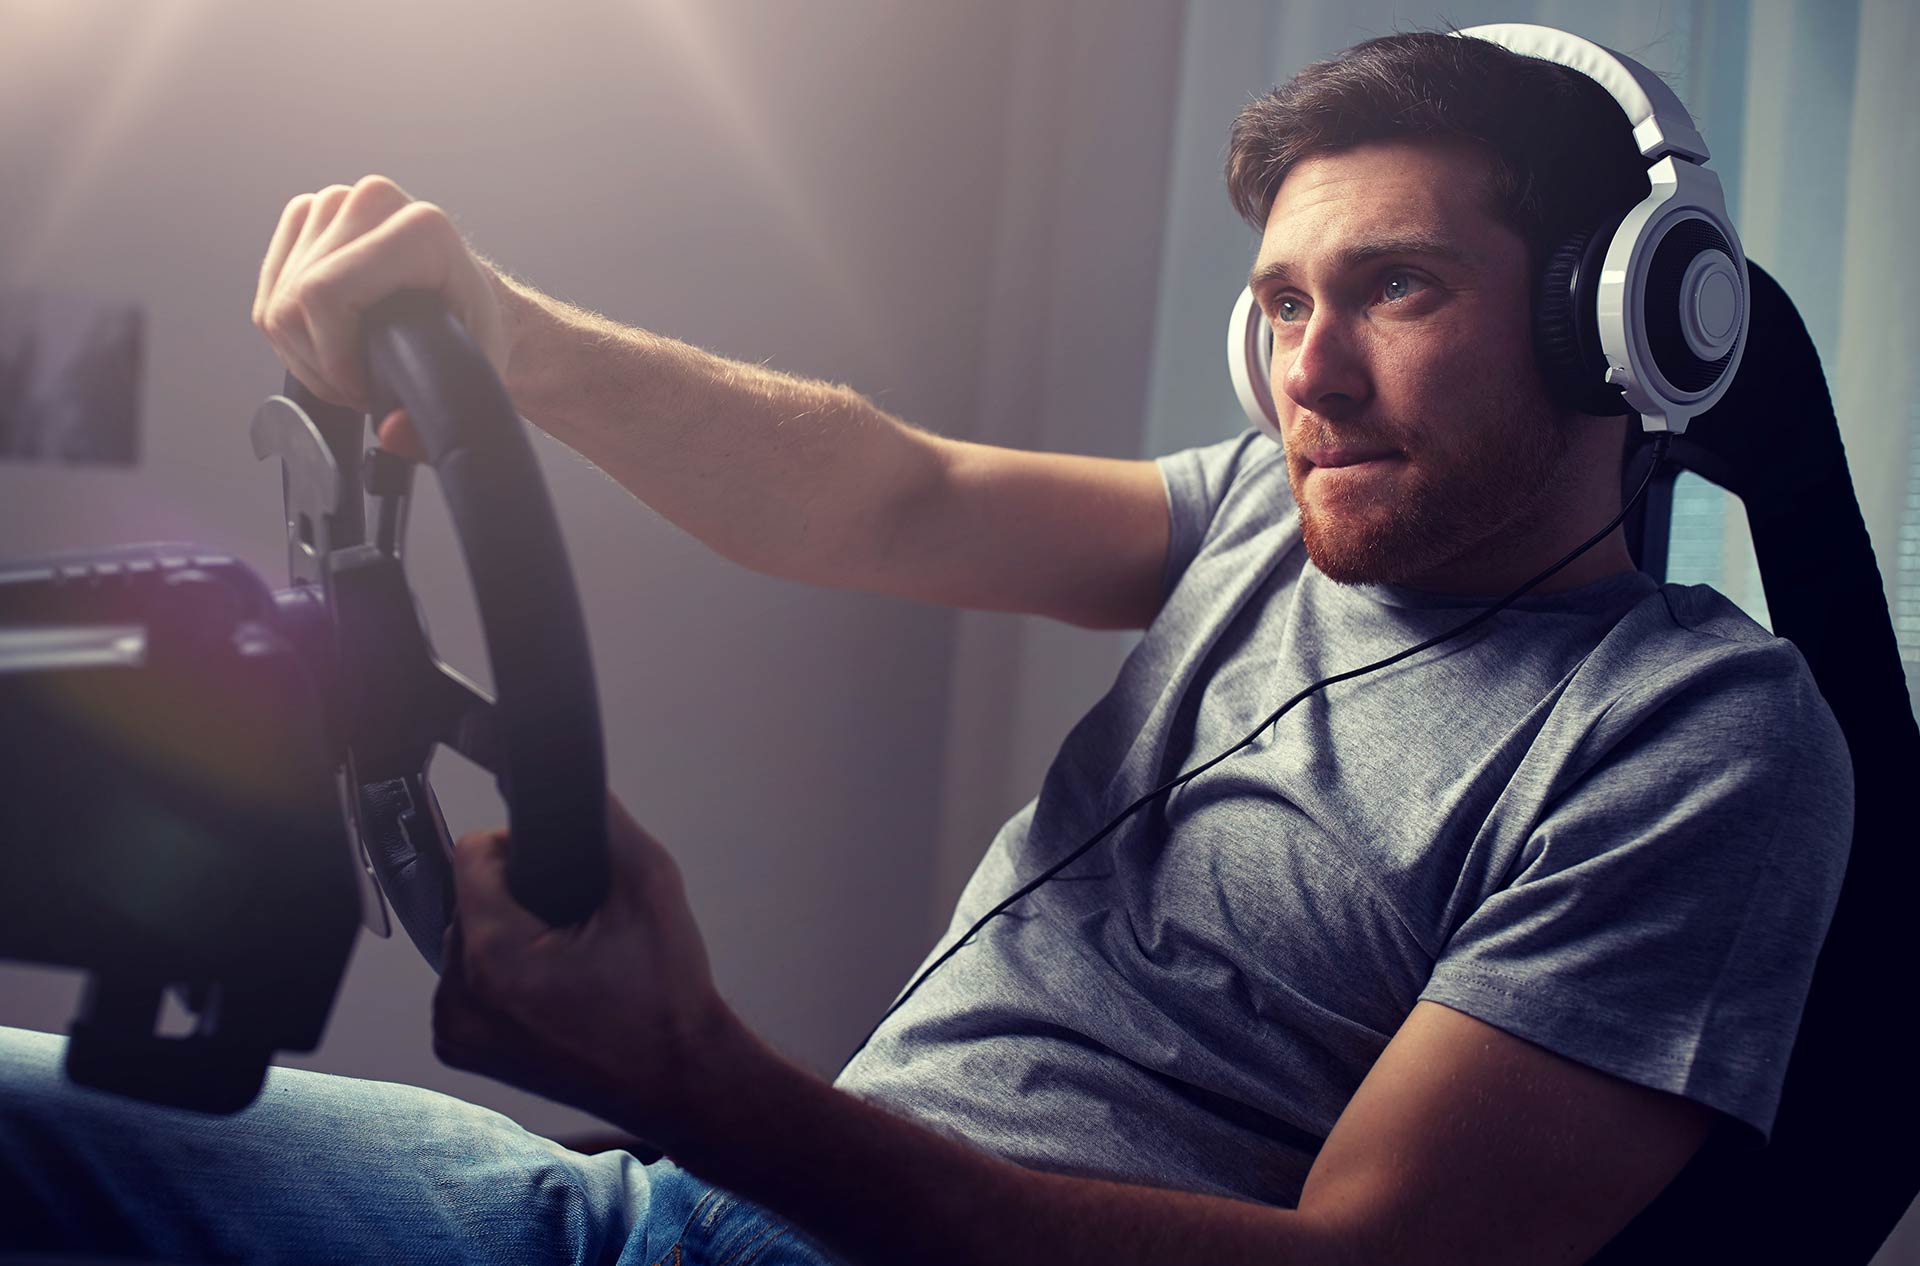 Image of a man wearing a headset and playing a racing sim game